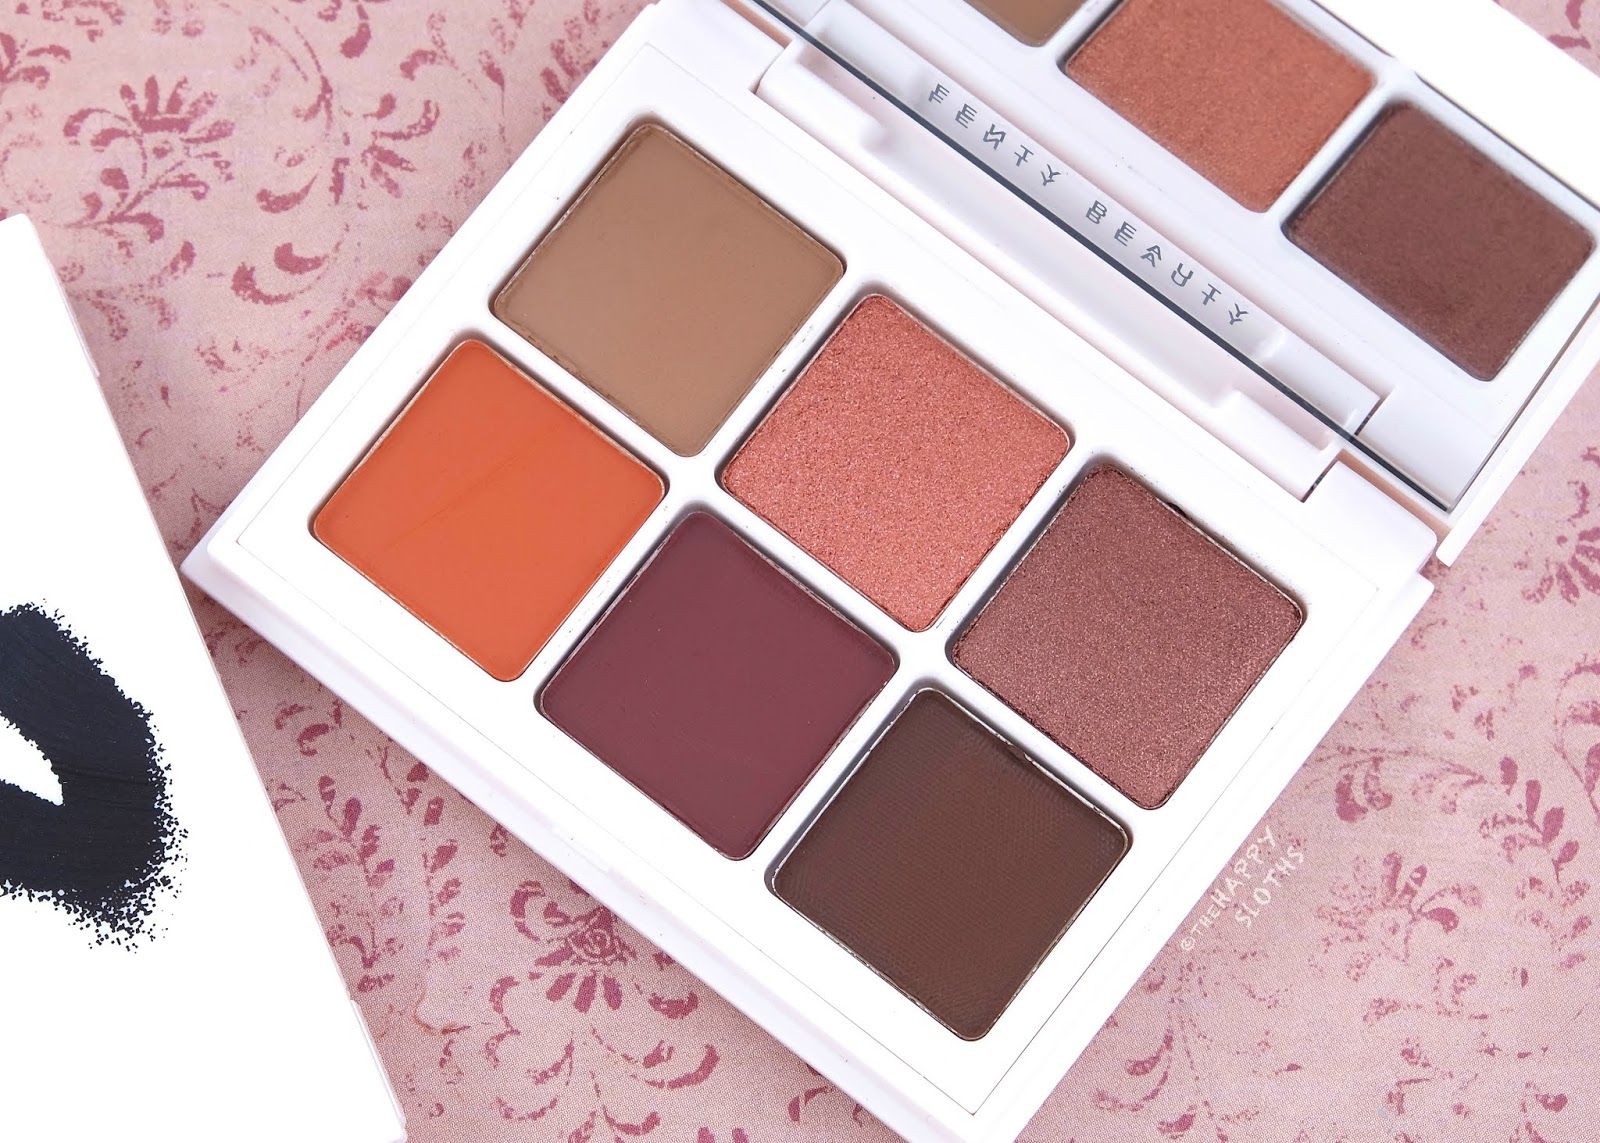 Fenty Beauty | Snap Shadows Mix & Match Eyeshadow Palette in "3 Deep Neutrals": Review and Swatches